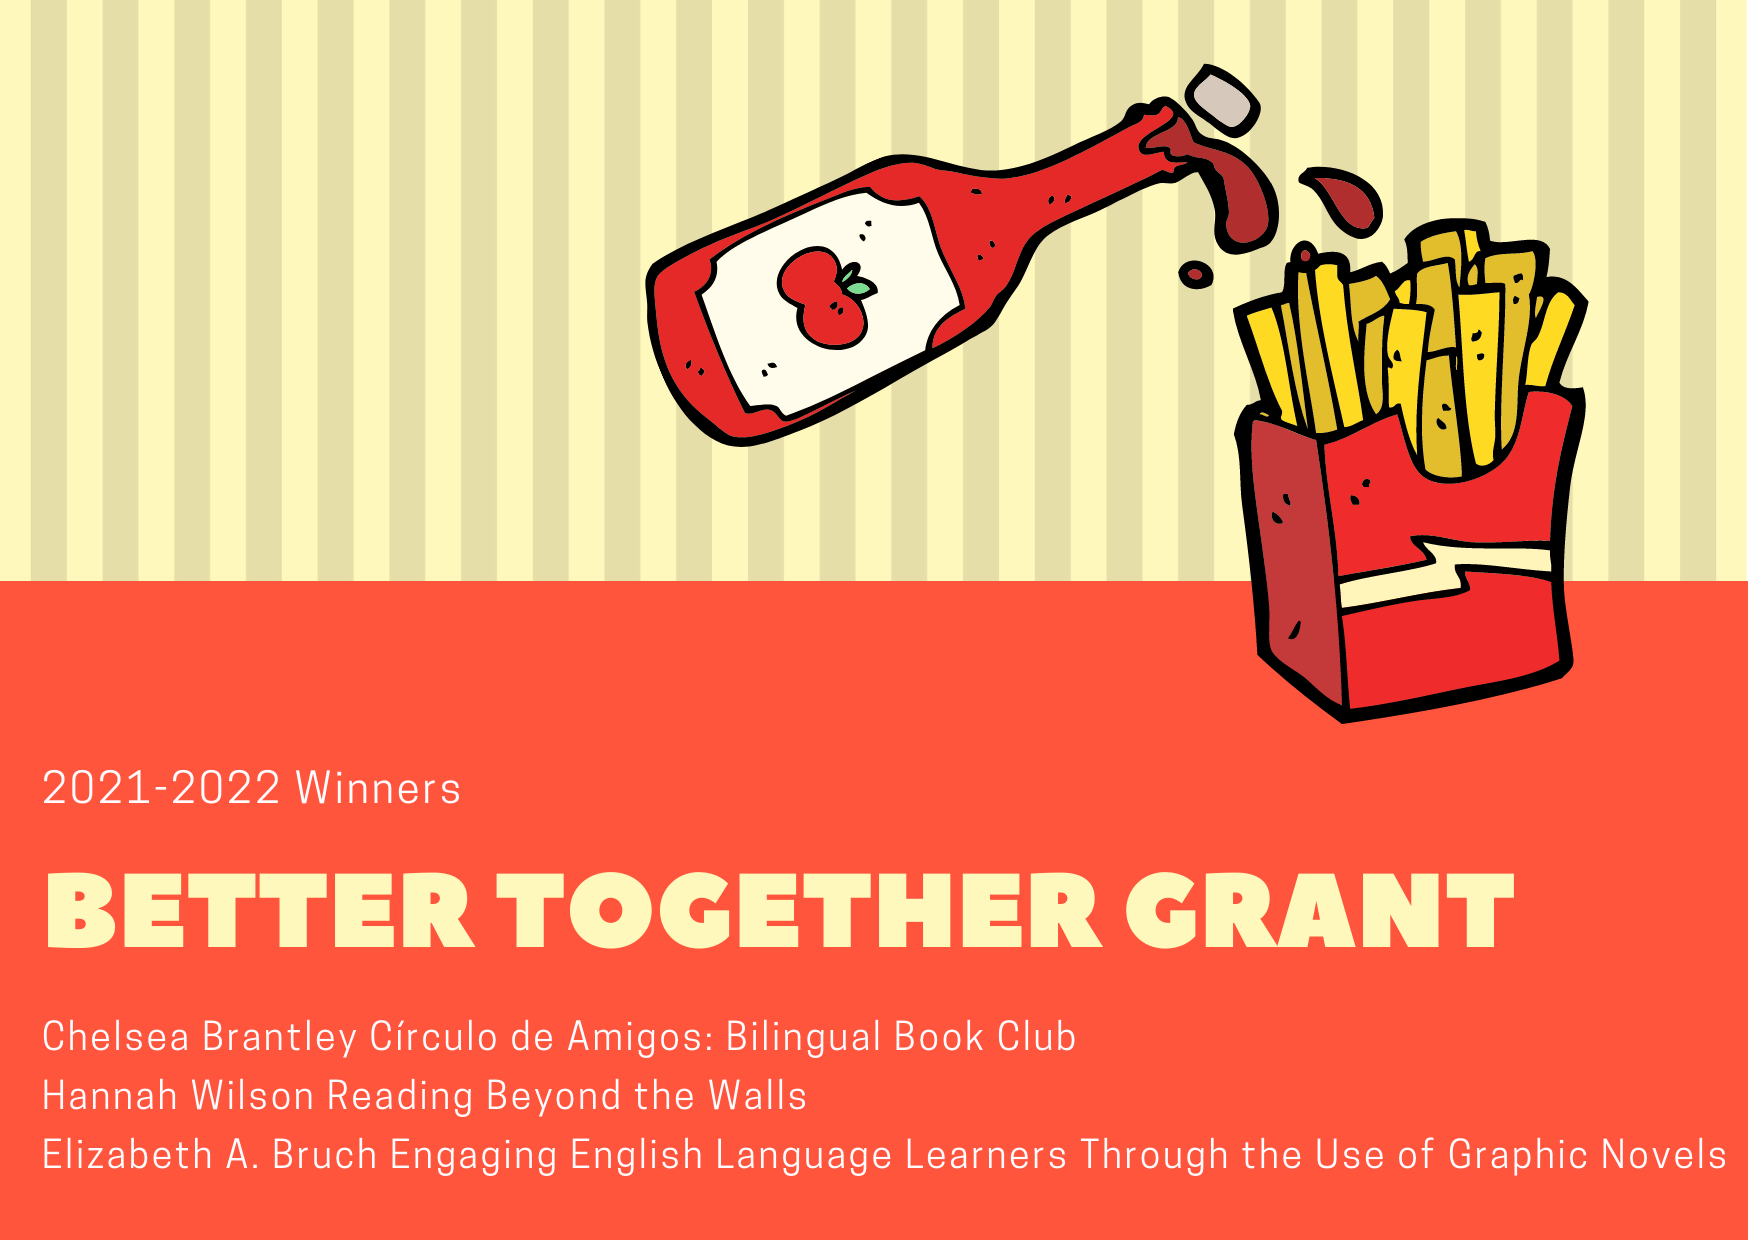 Congratulations to the Better Together Grant winners